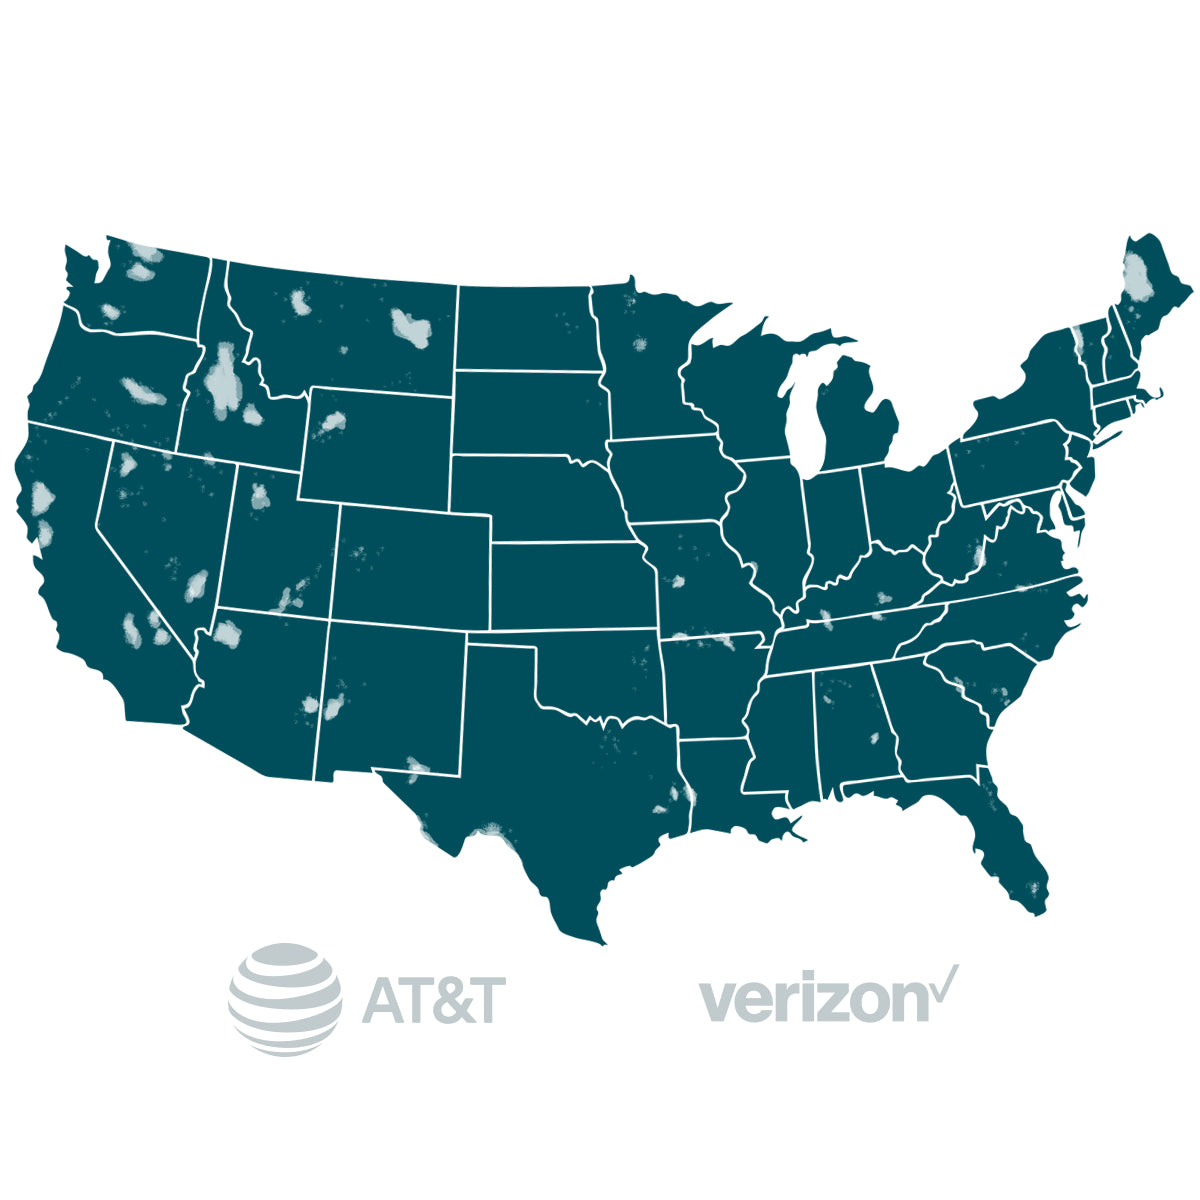 AT&T and Verizon cellular coverage map for Flex Aware cellular contact sensor 